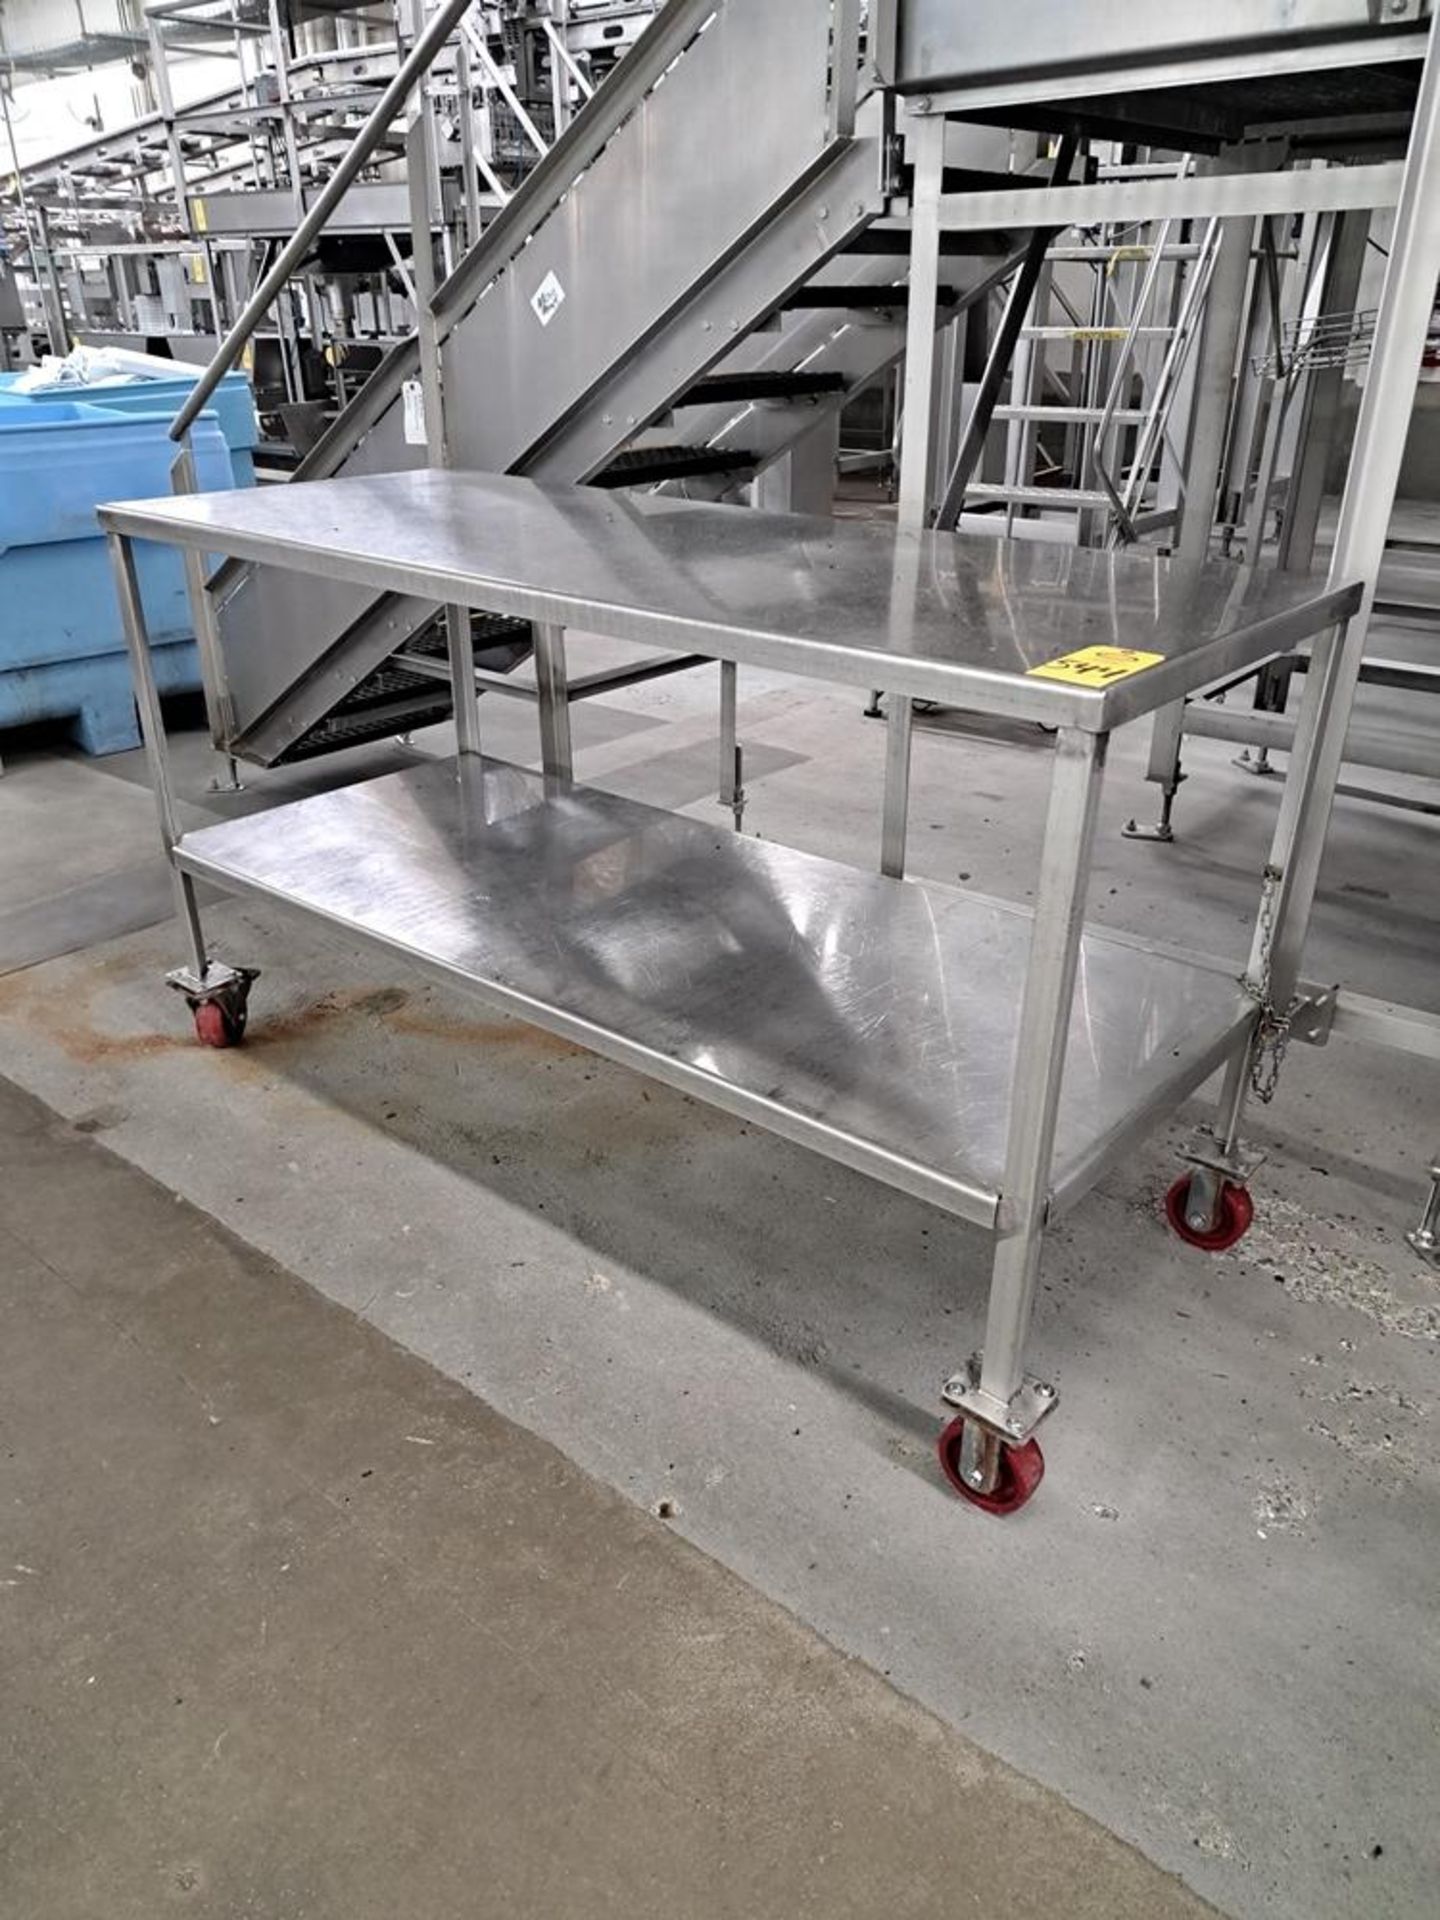 Portable Stainless Steel Table with bottom shelf, 30" W X 6' L X 44" T: Required Loading Fee $150.